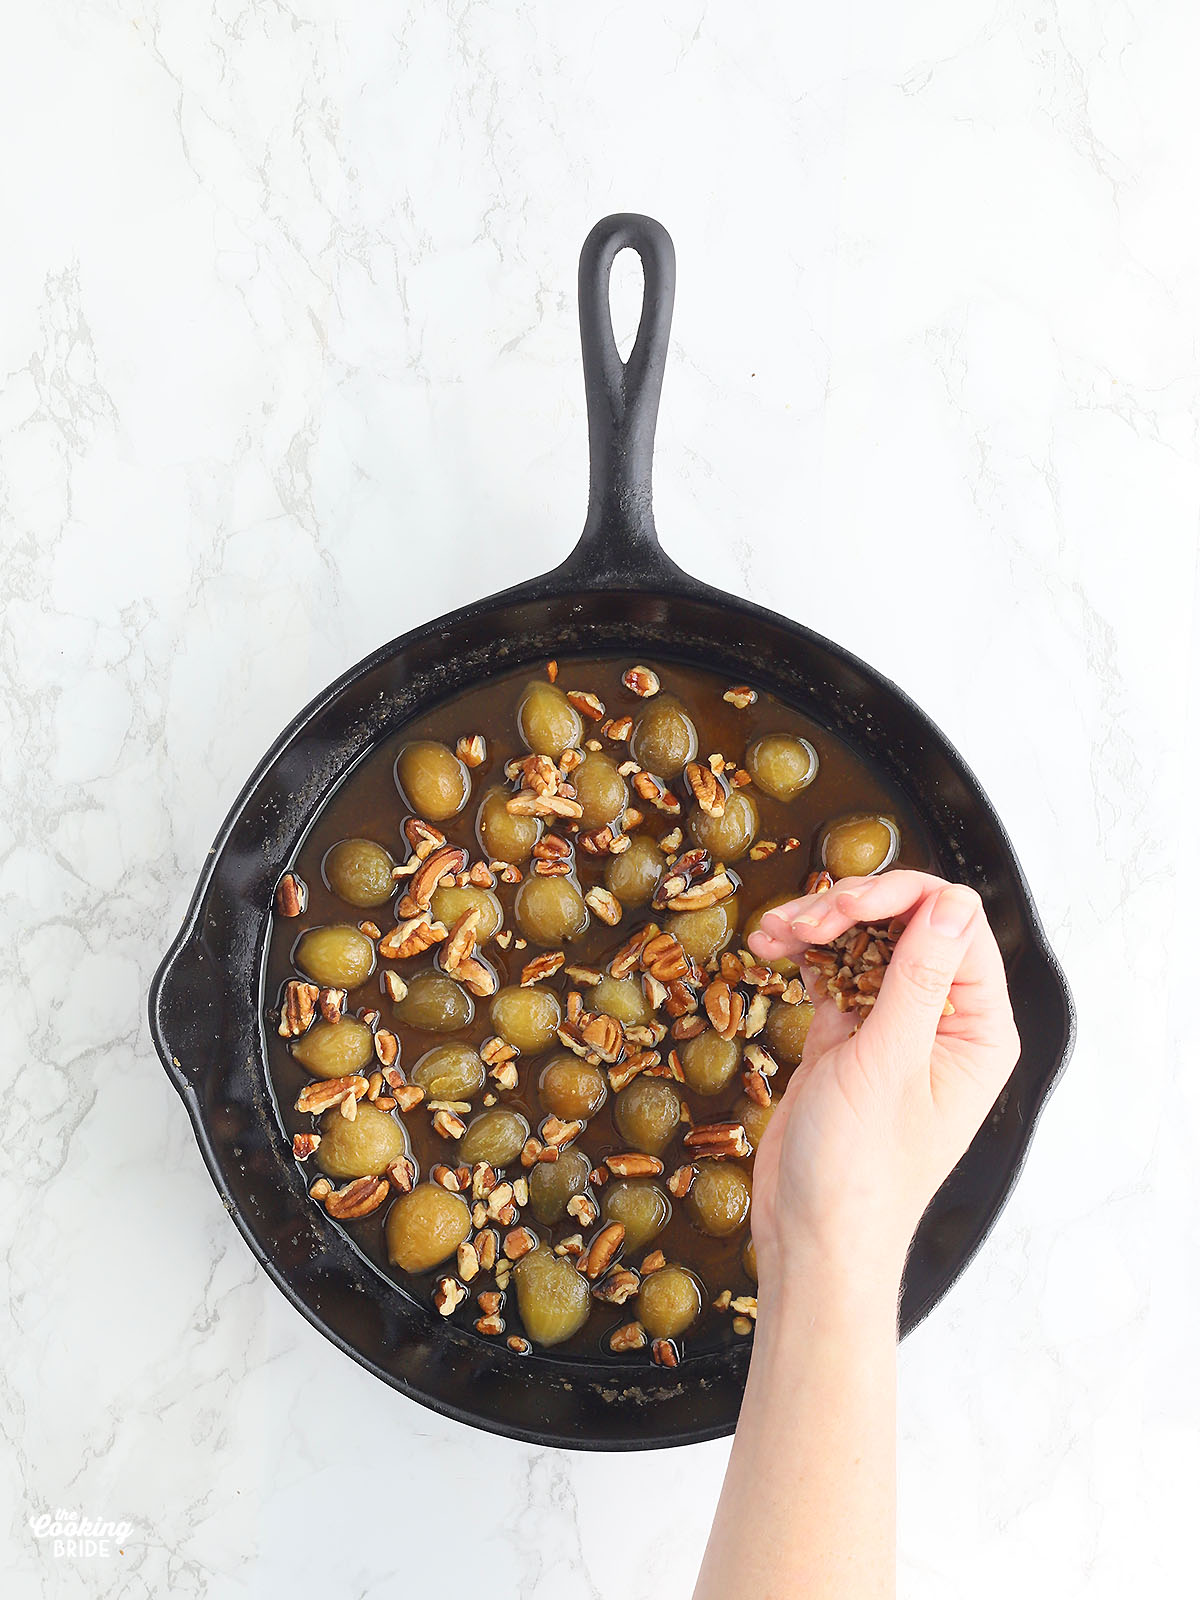 hand sprinkling chopped pecans over the figs in a cast iron skillet